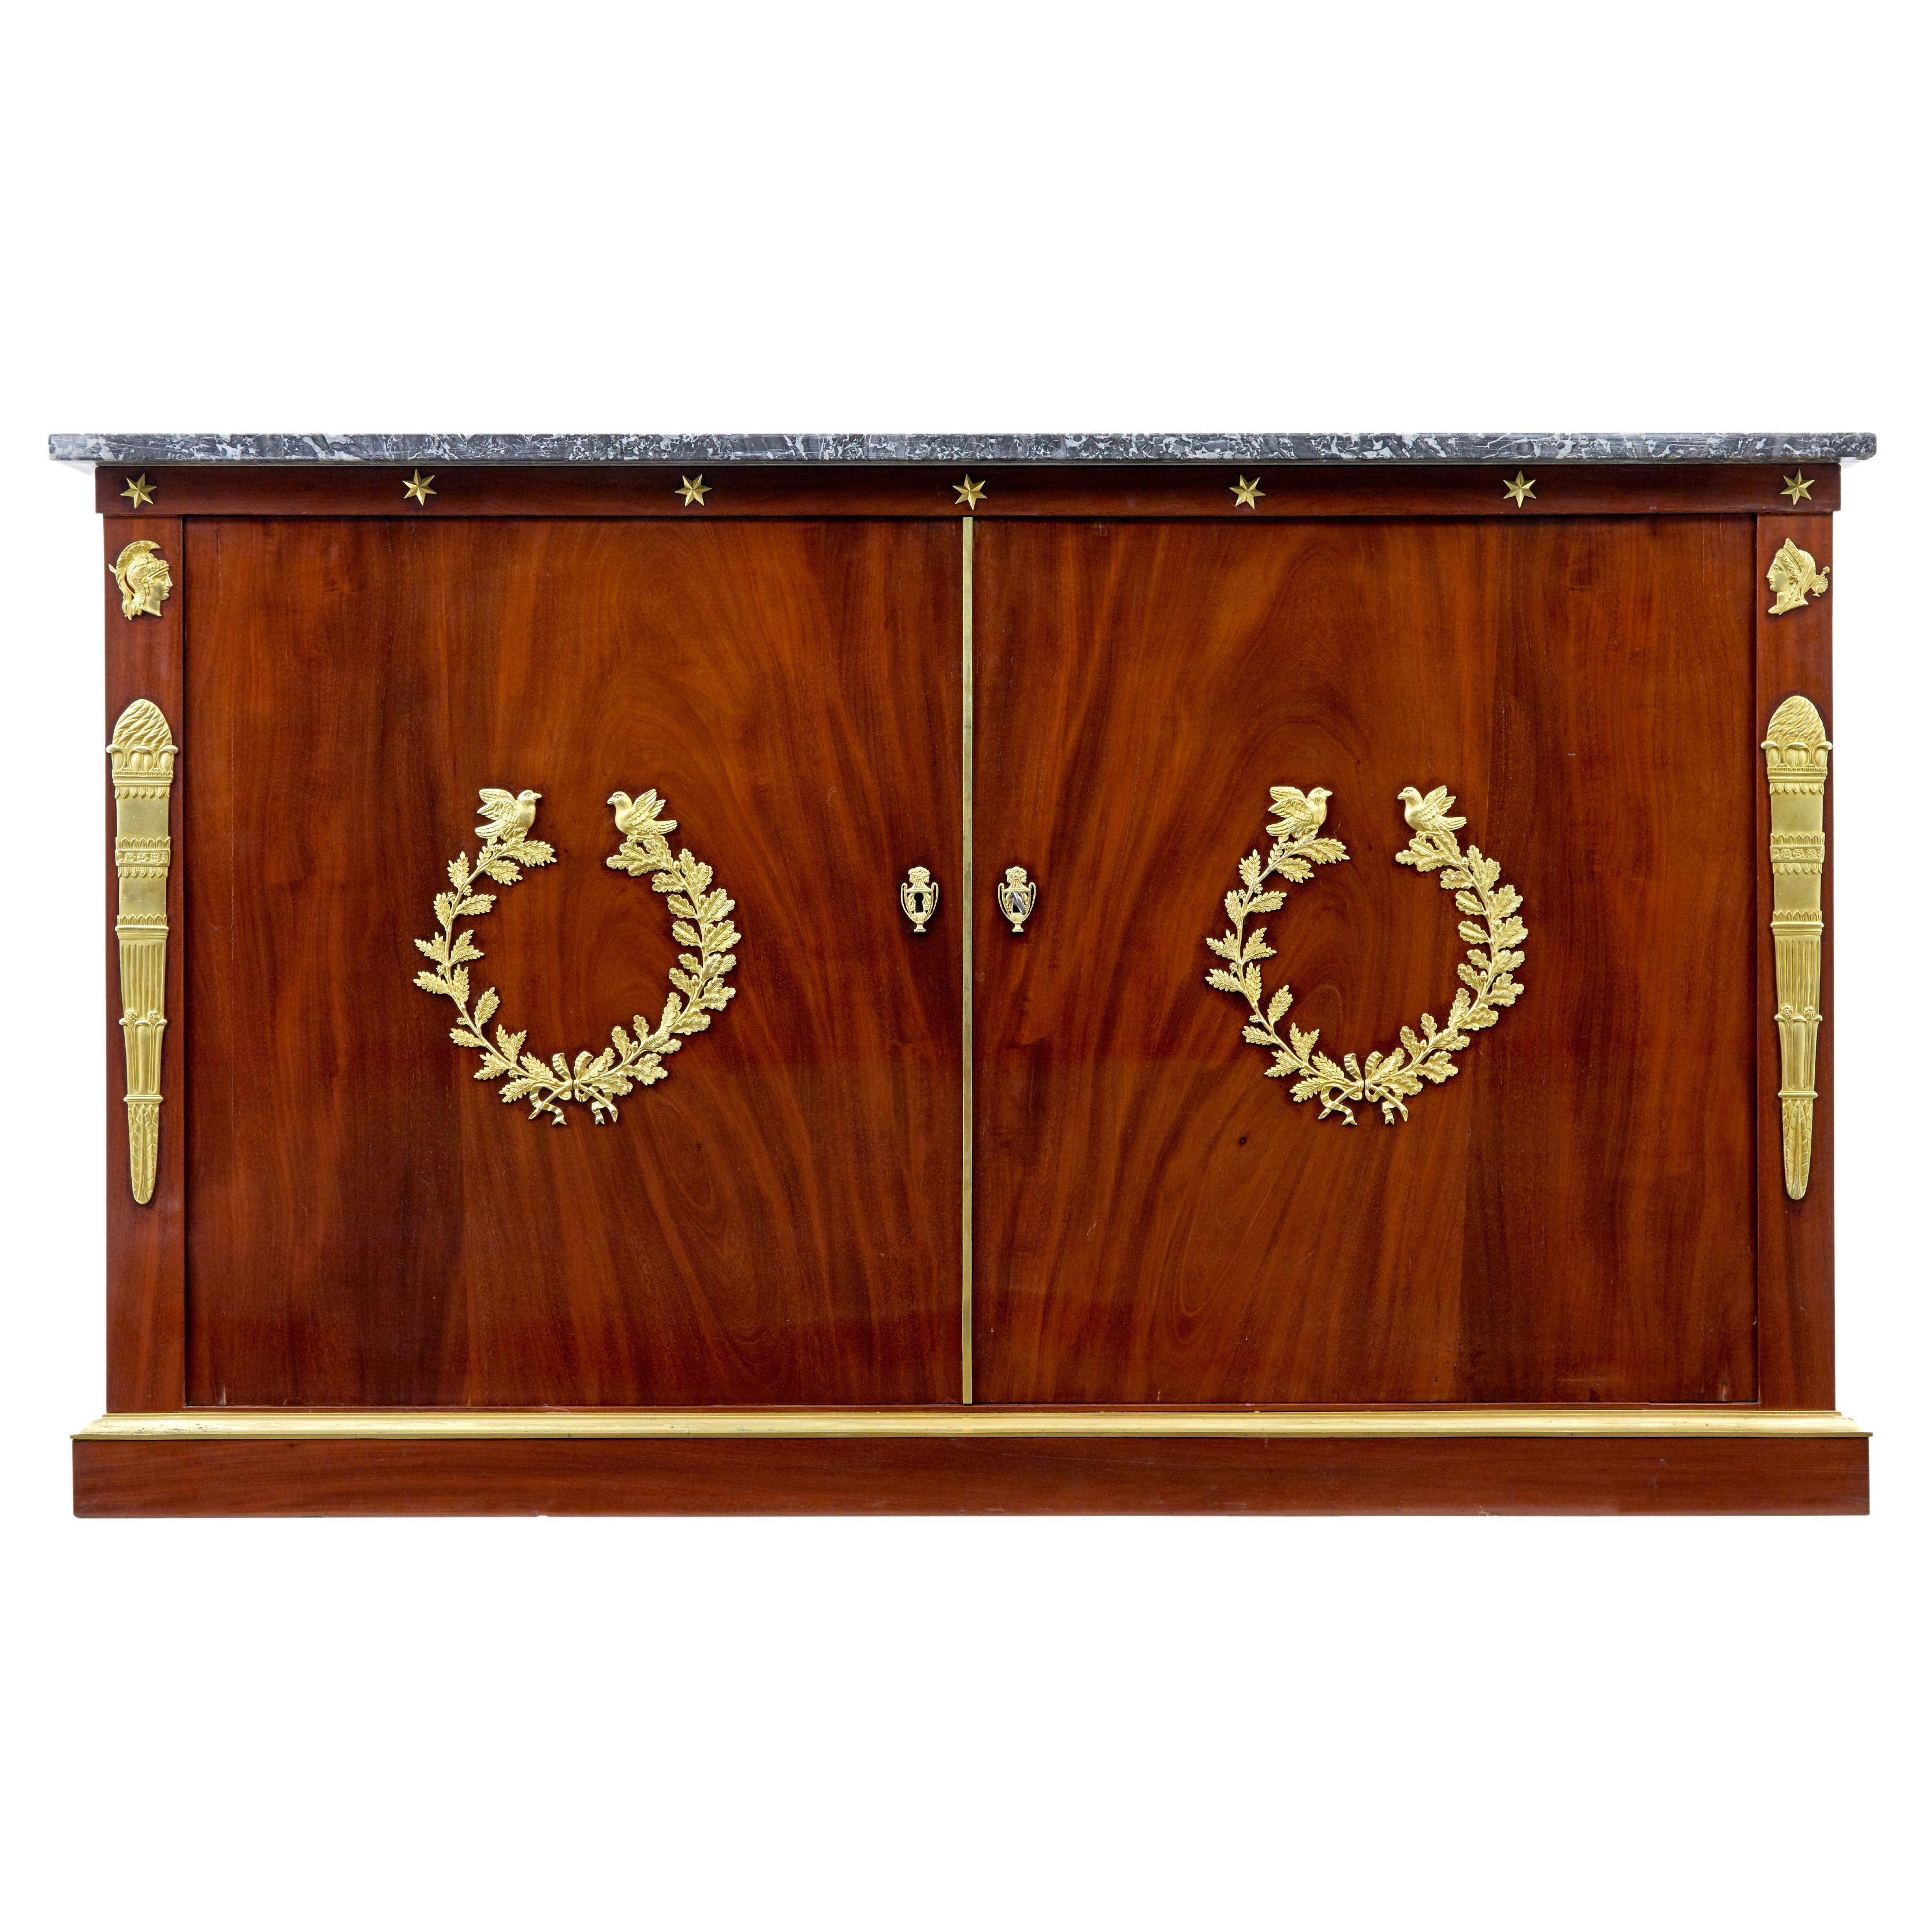 19th century French empire mahogany sideboard For Sale